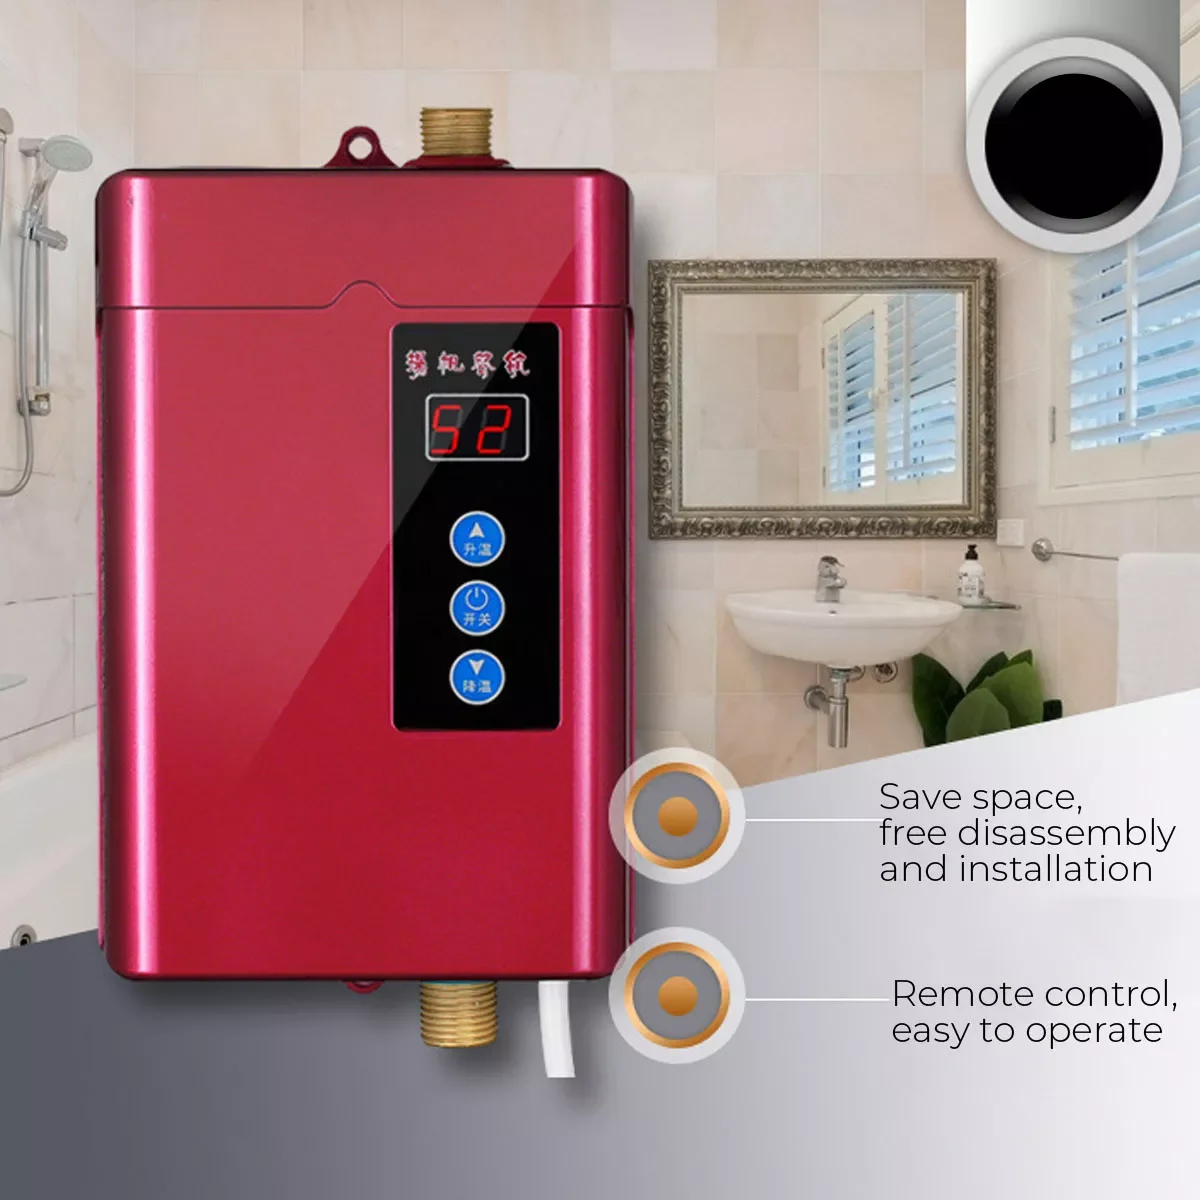 4000W 110-240V Instant Electric Mini Tankless Water Heater Hot Instantaneous Water Heater System for Kitchen Bathroom enlarge